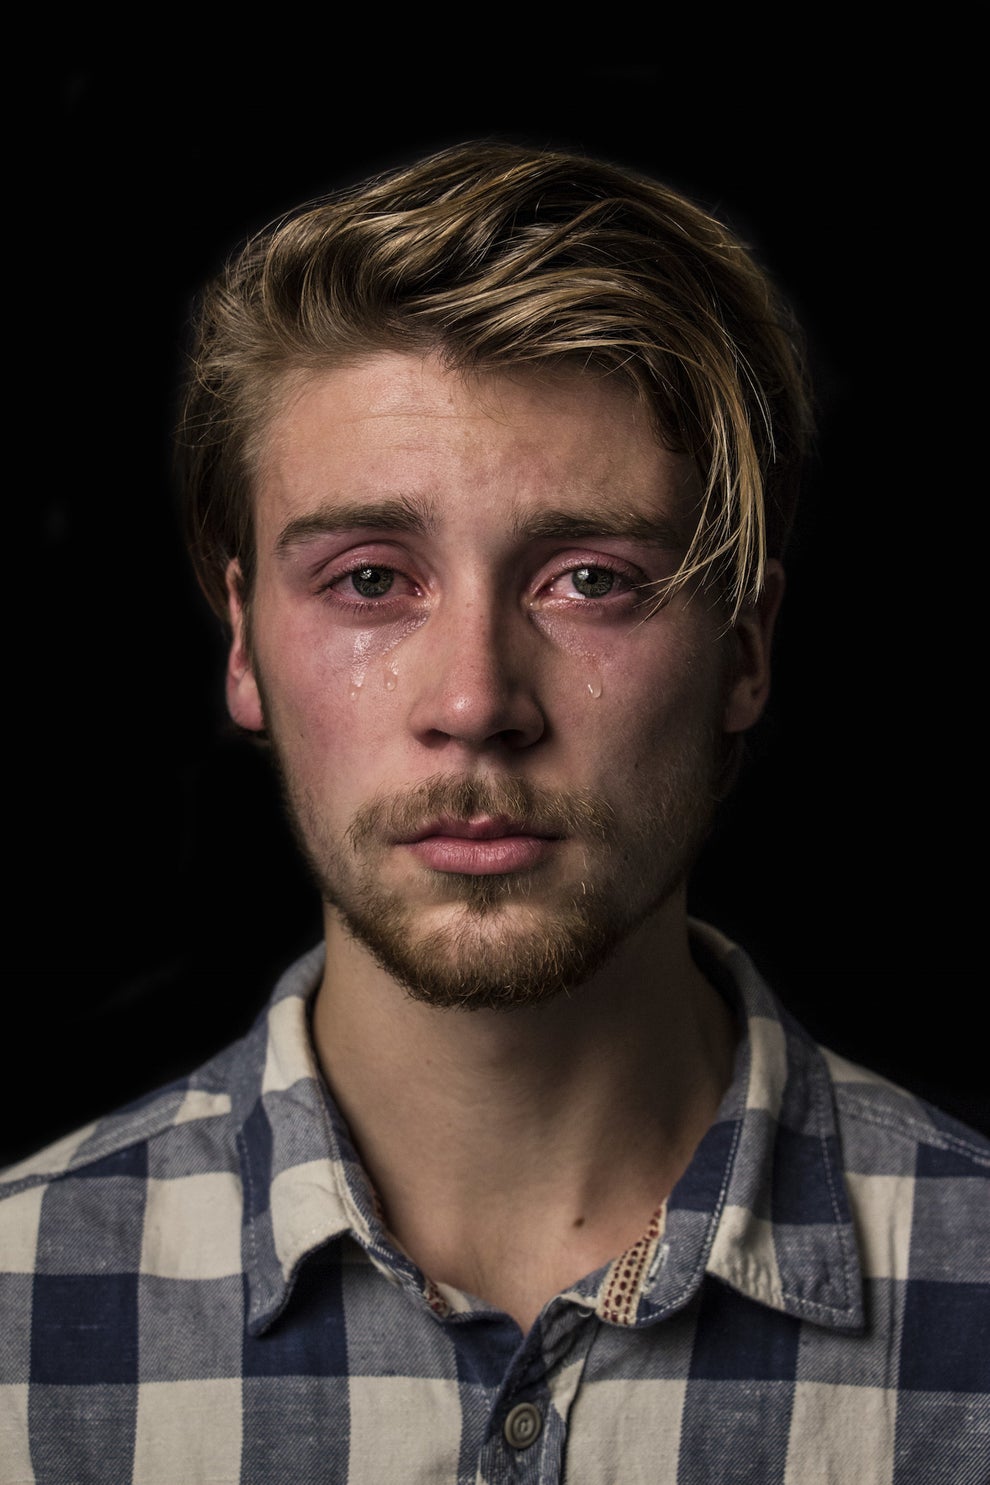 18 Photos Of Men Crying That Challenge Gender Norms